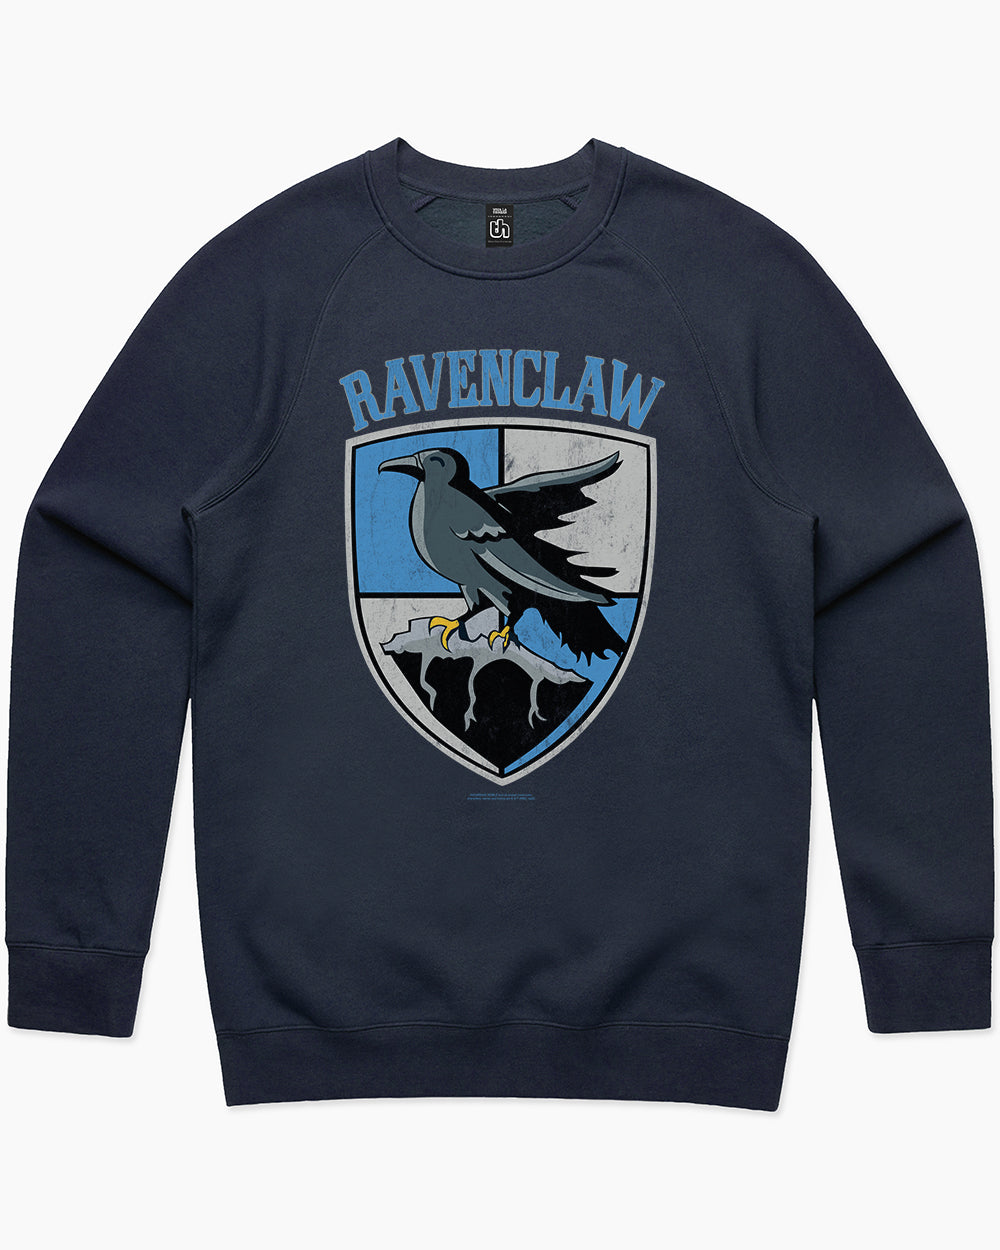 Ravenclaw Crest Hoodie | Official | Potter Merch Harry Threadheads